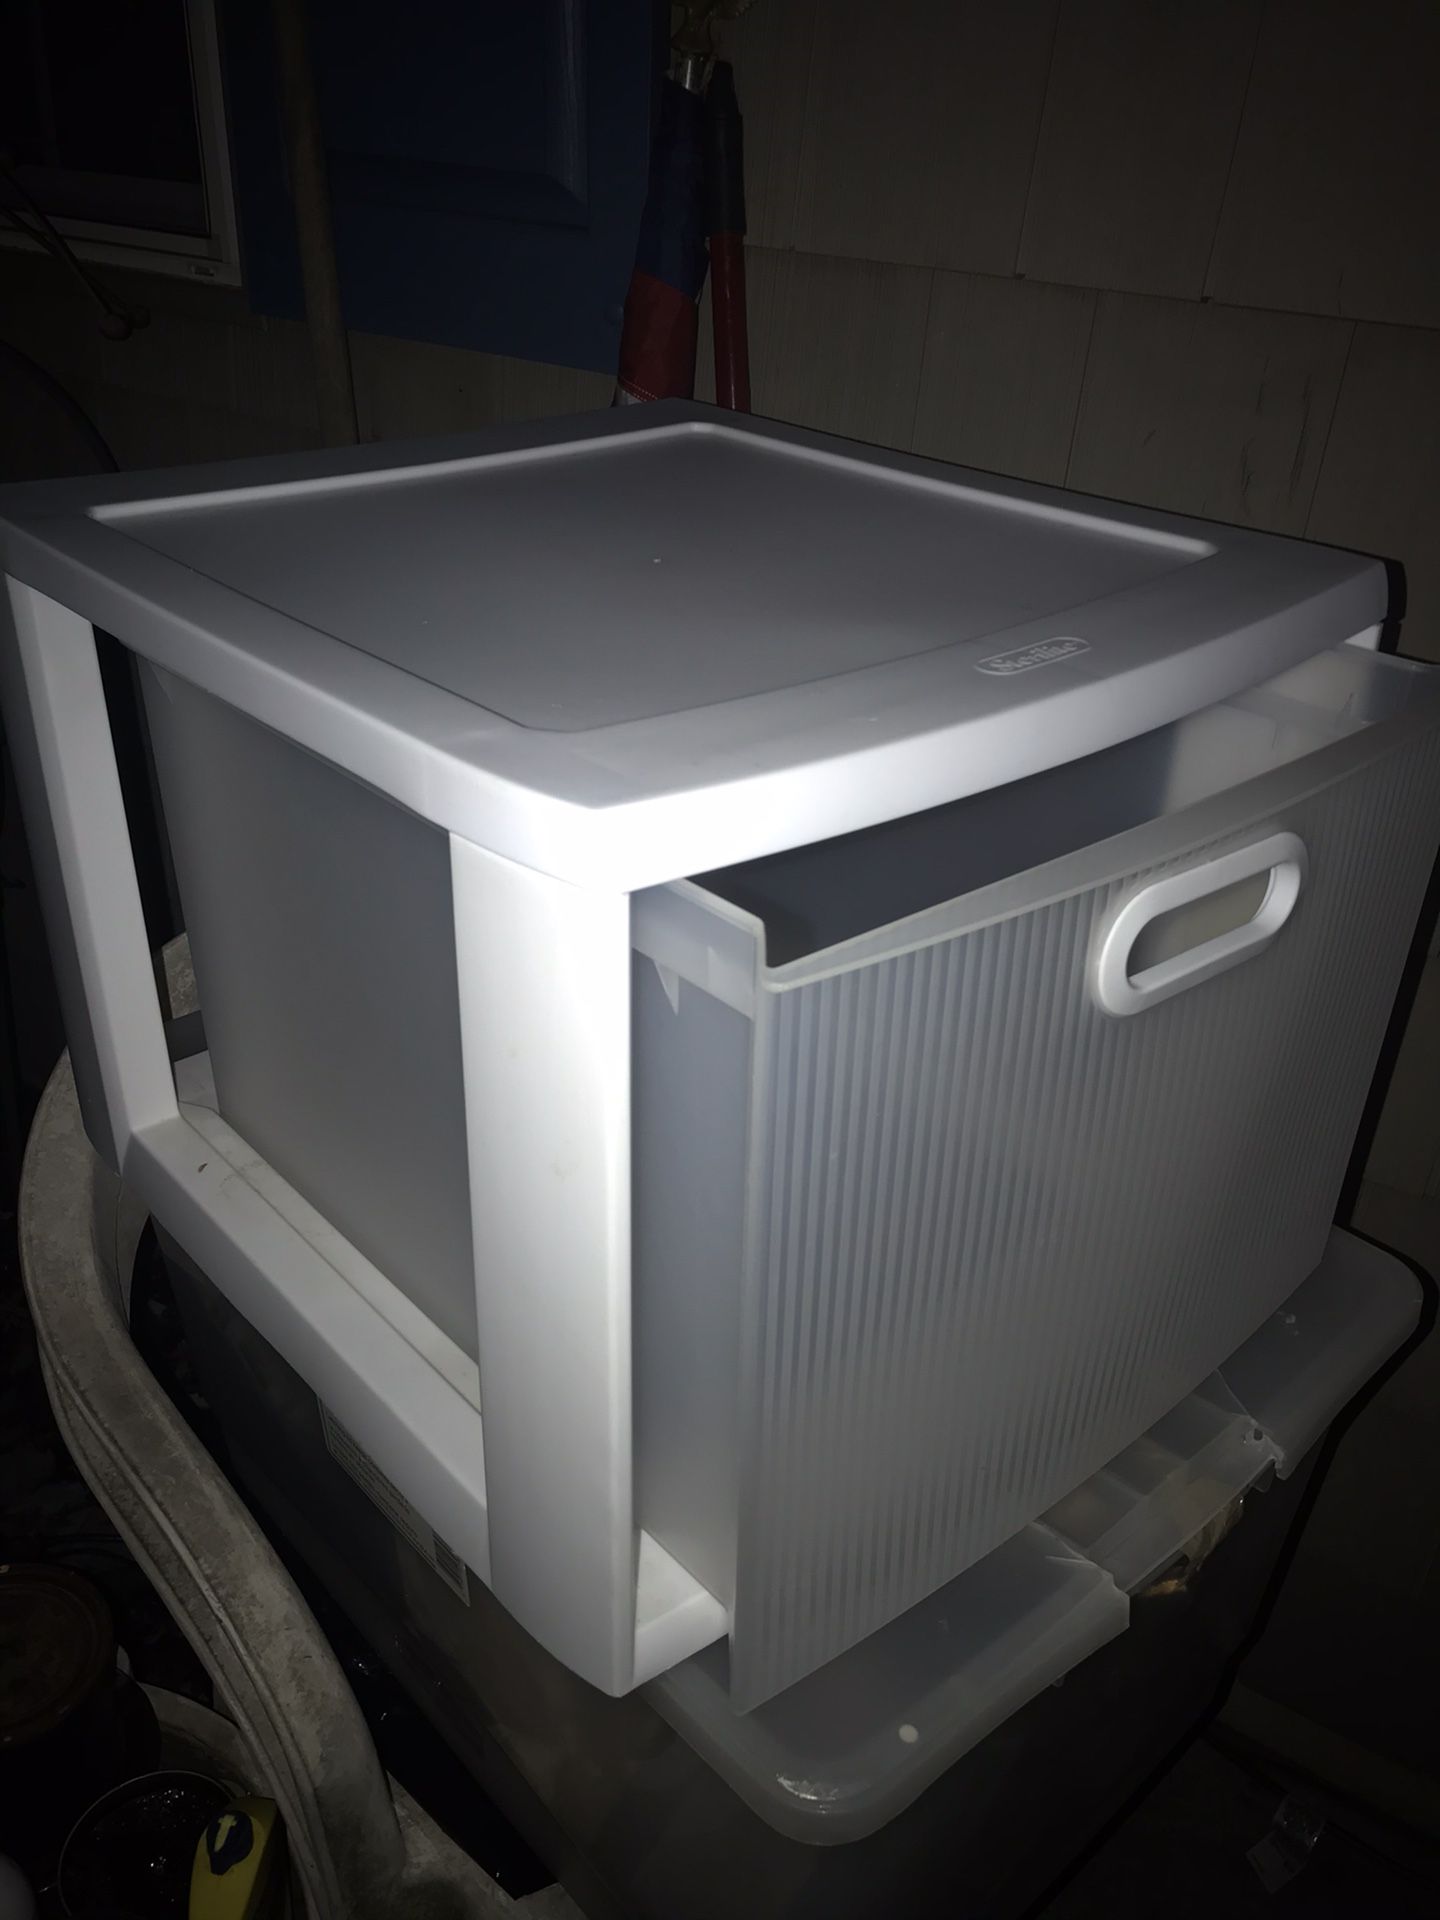 Lnew Large Storage Drawer Cabinet Only $10 Firm